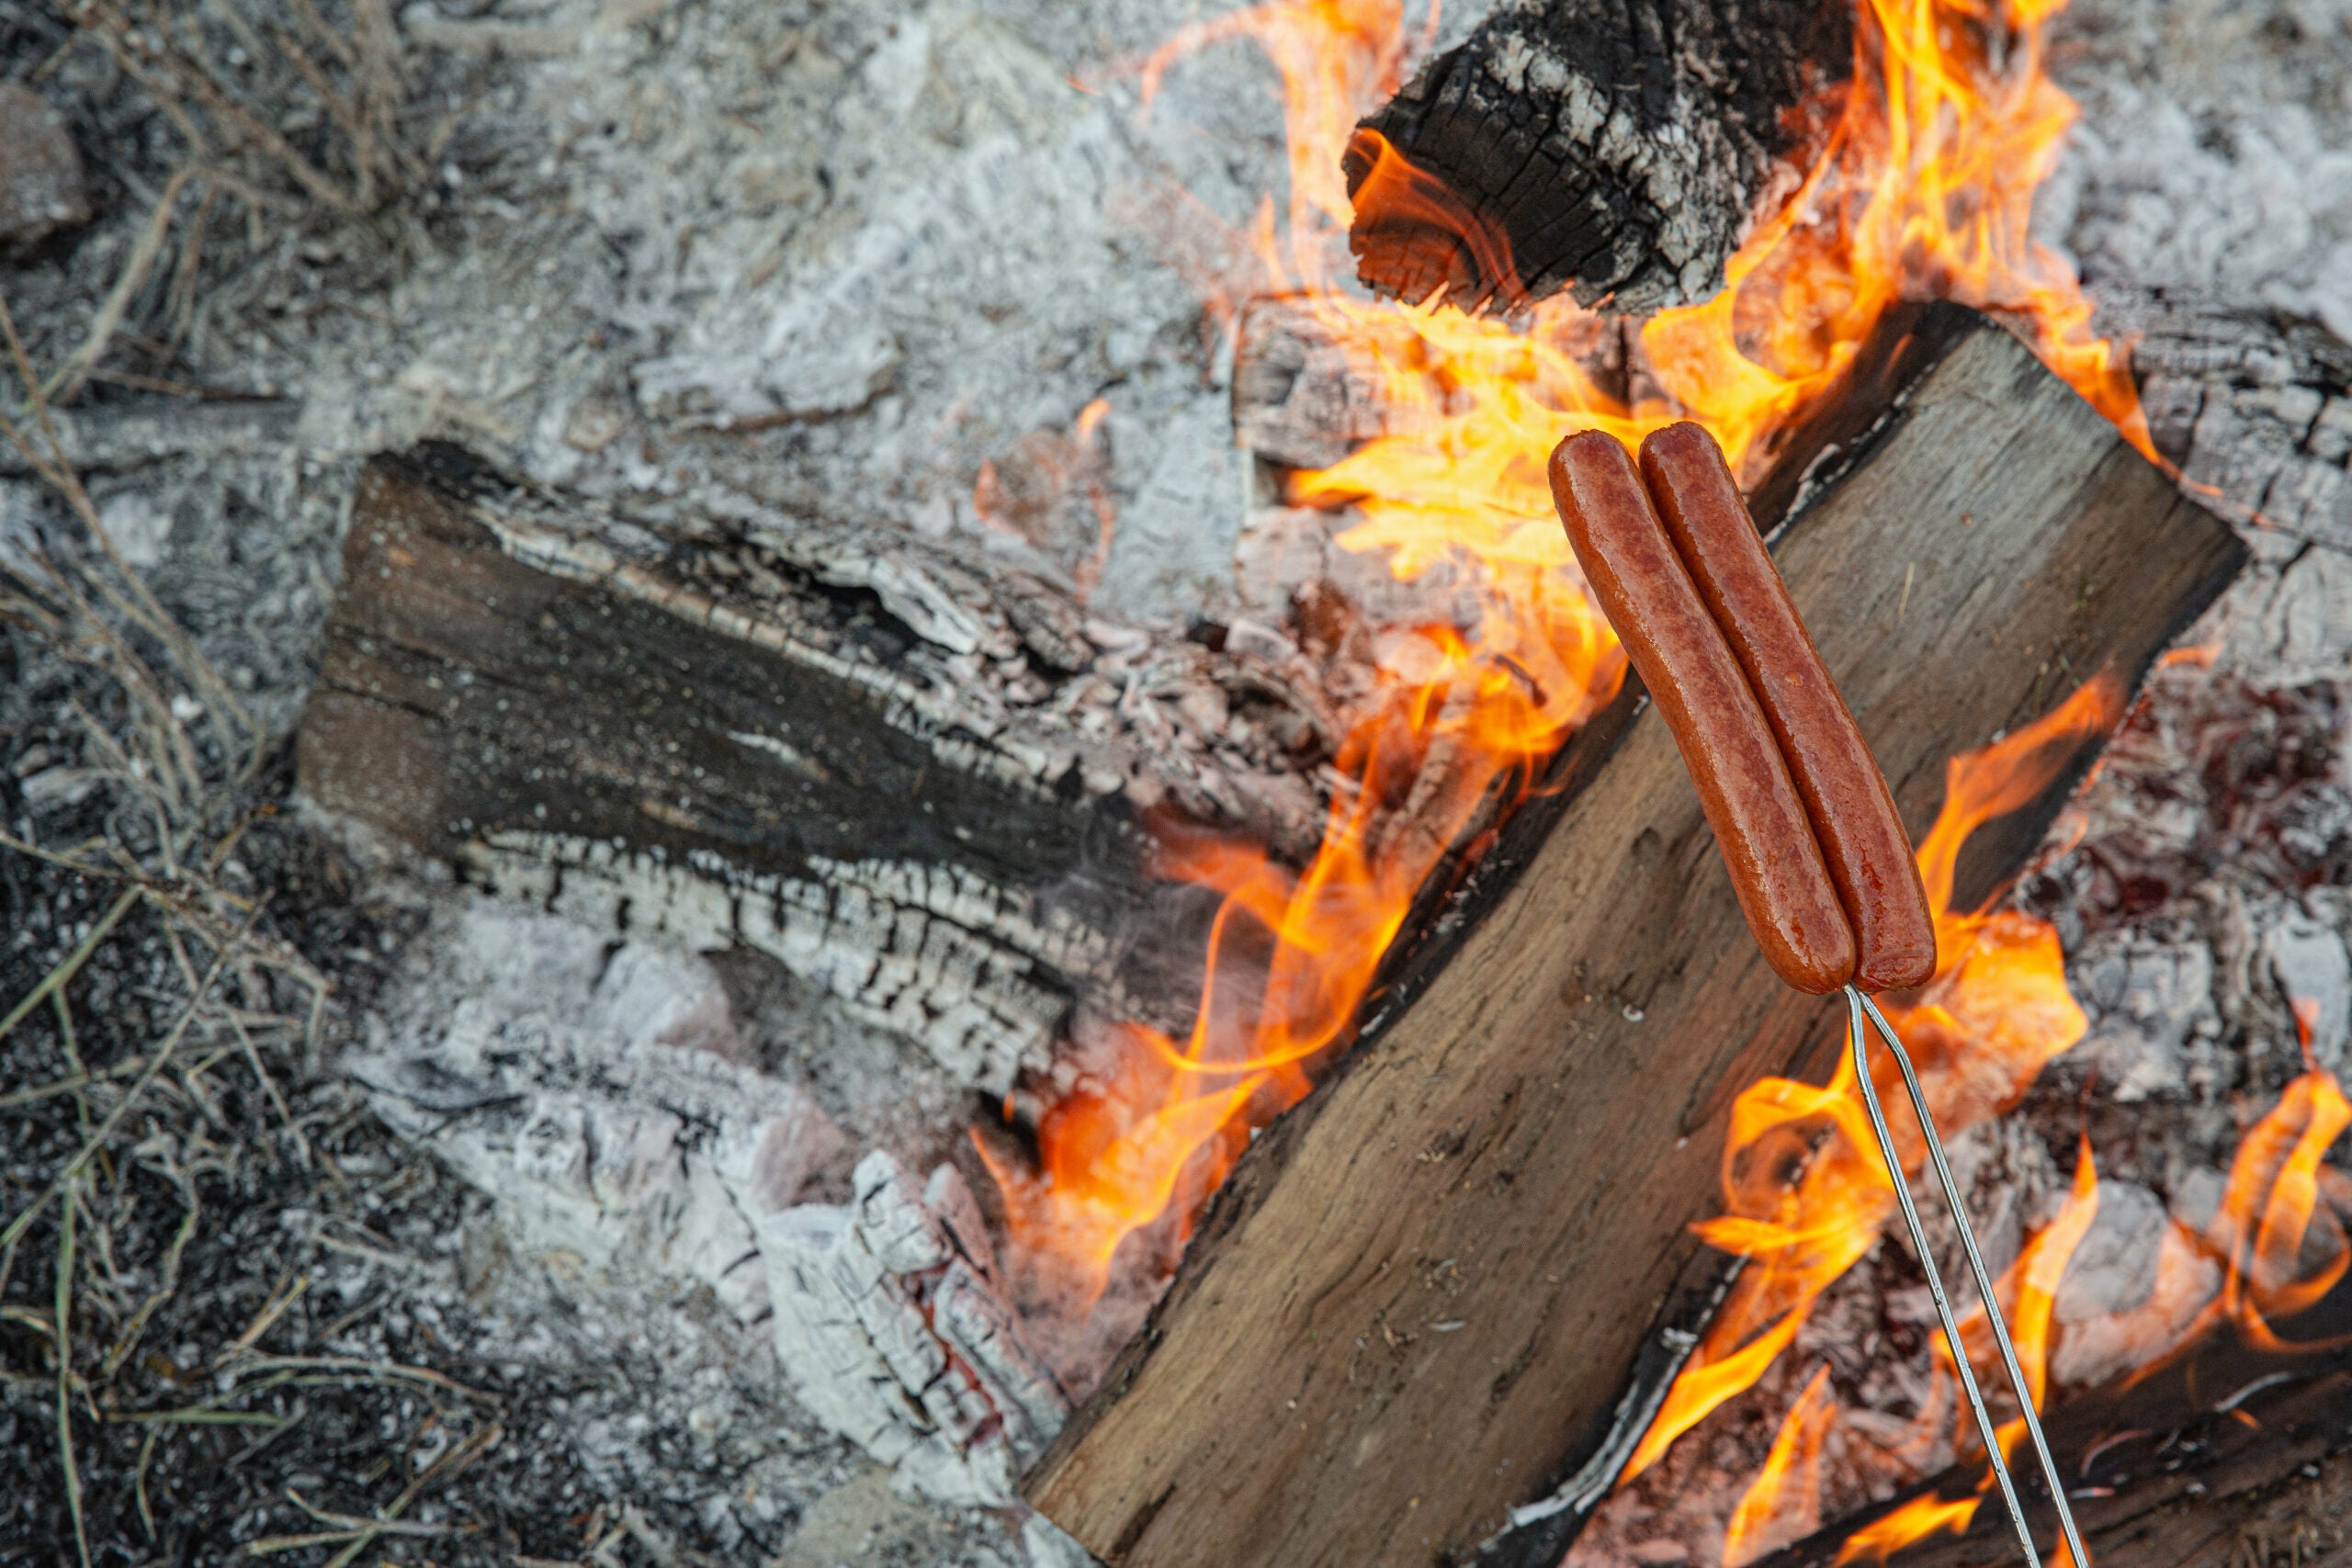 roasting hot dogs over fire are the perfect camping food idea